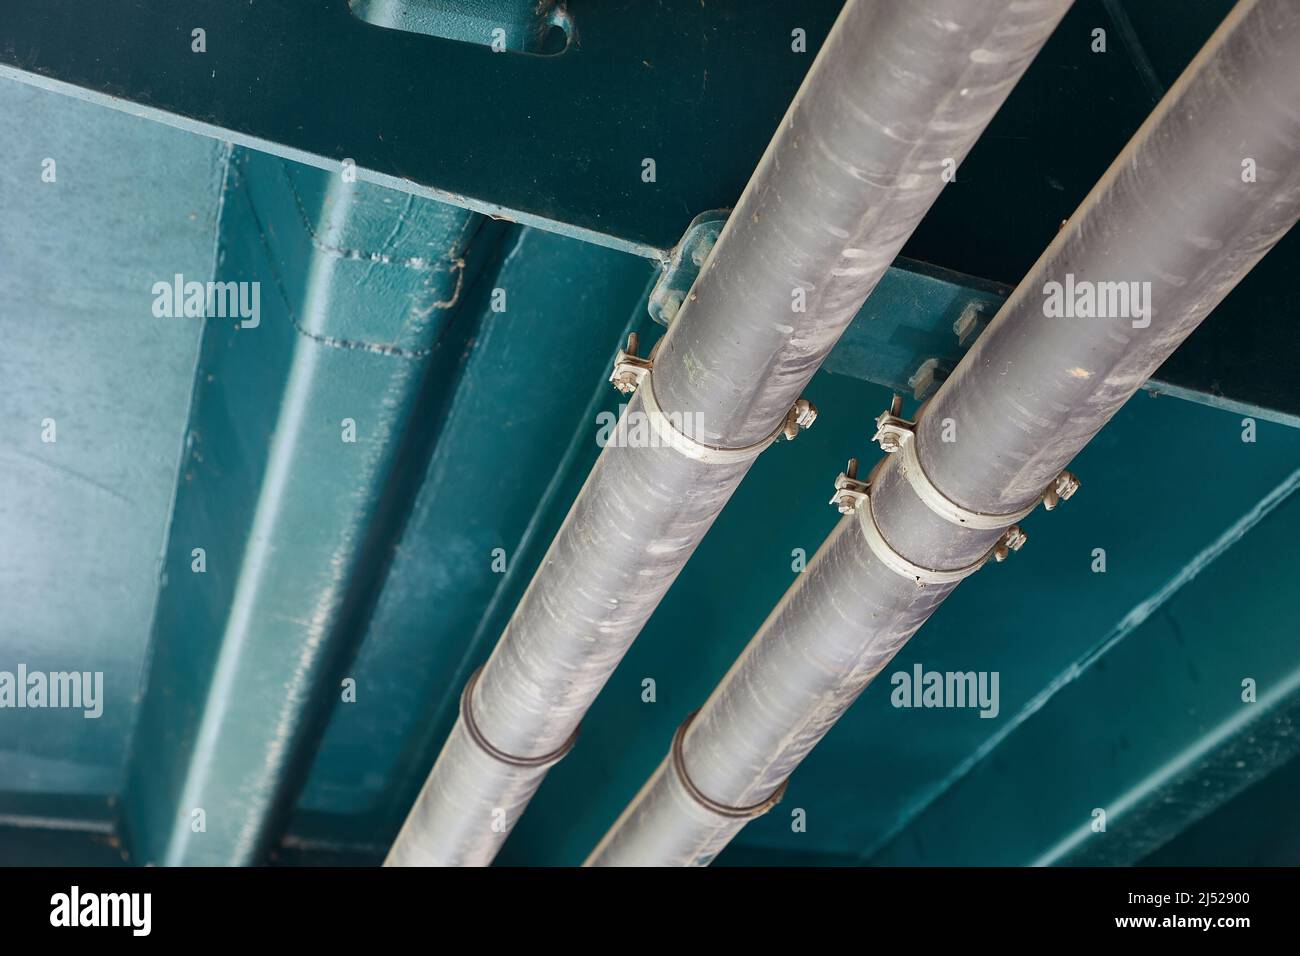 Pipelines below metal structure, urility tubes Stock Photo